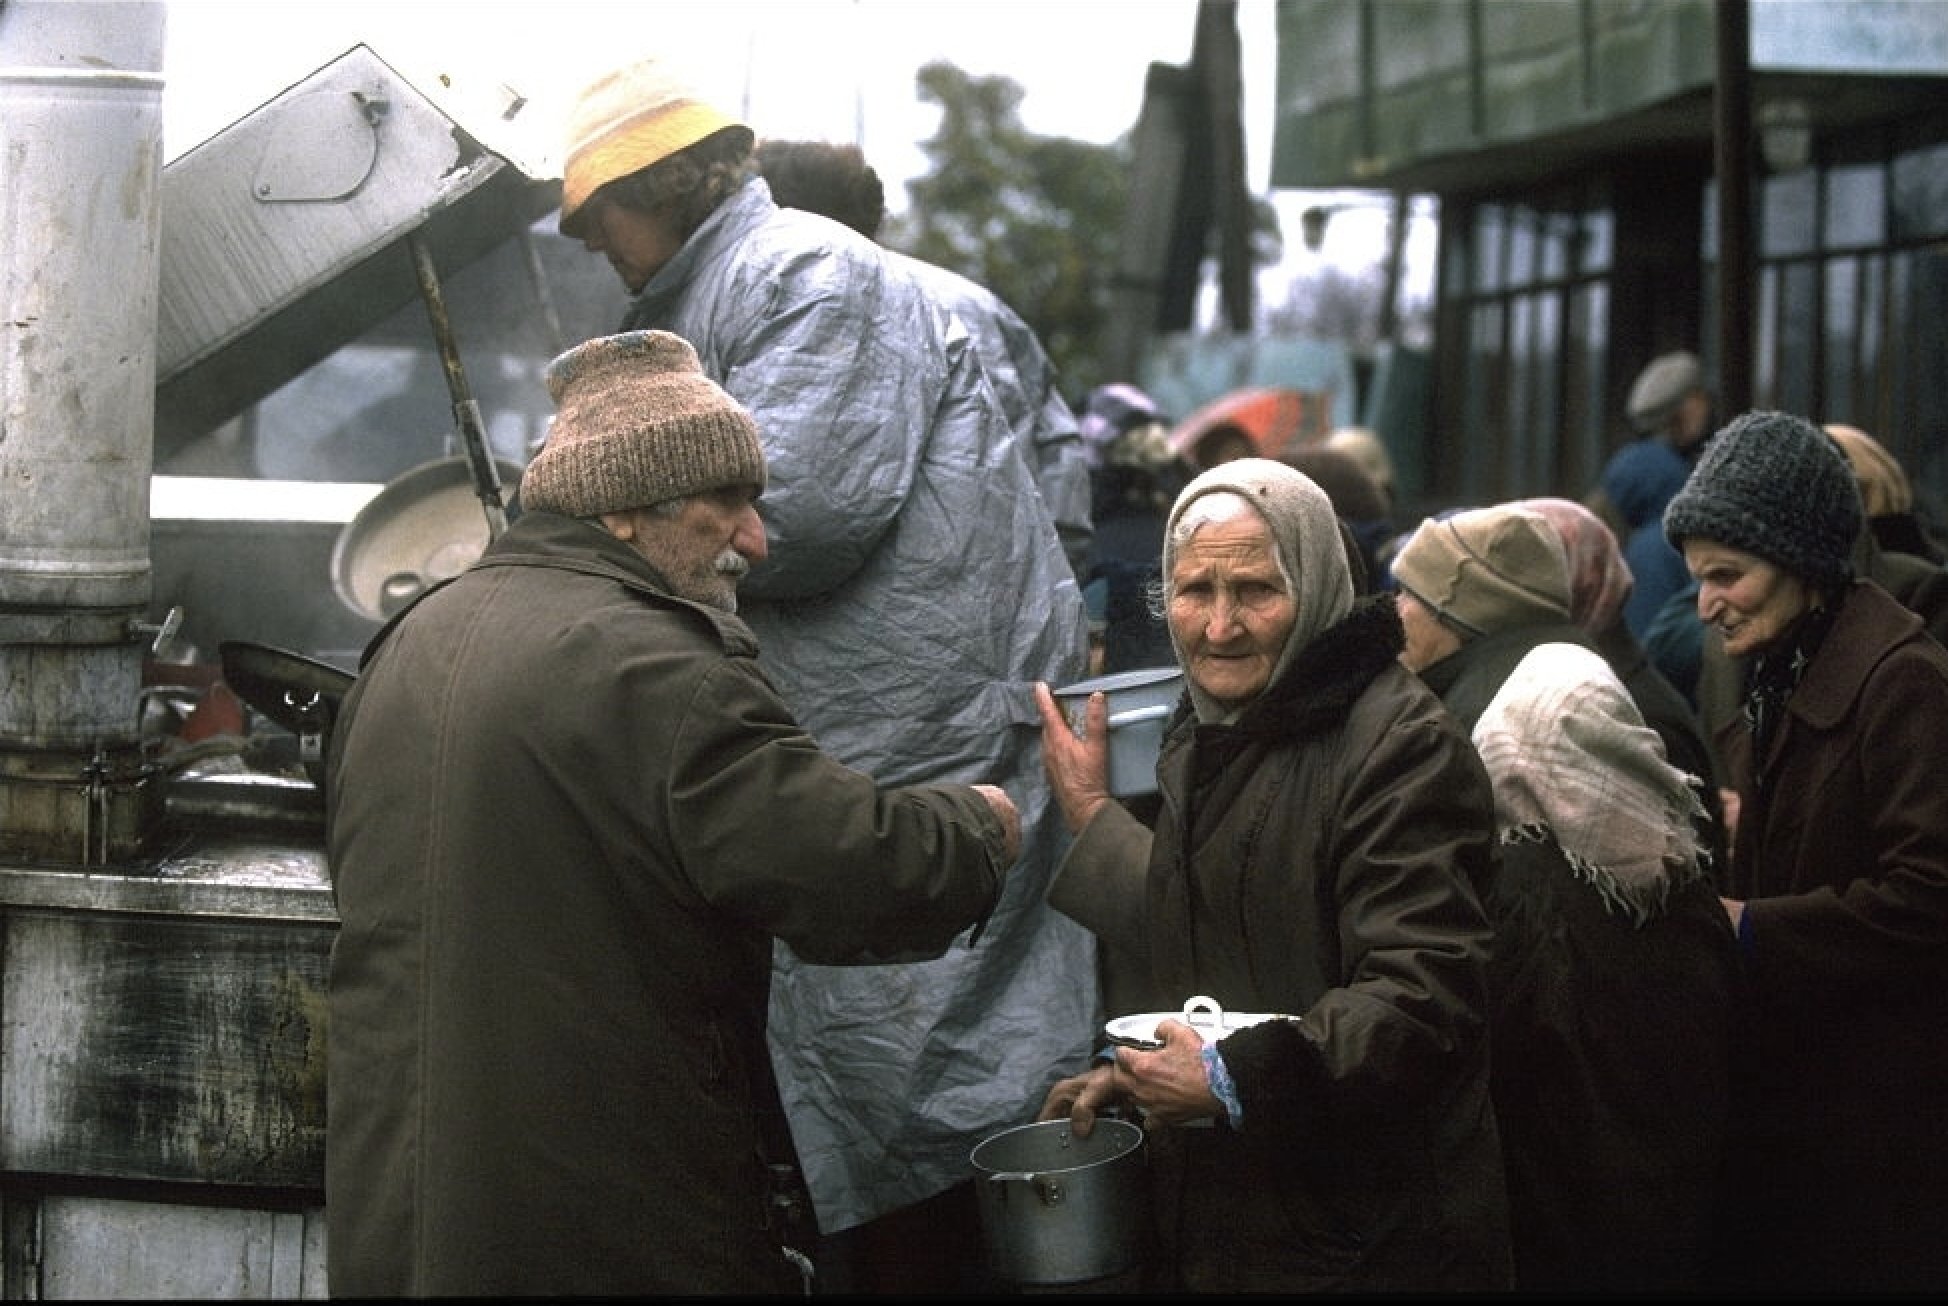 The 'Action Against Hunger' NGO in Abkhazia. Photo by Bernard Bisson (January 1998)